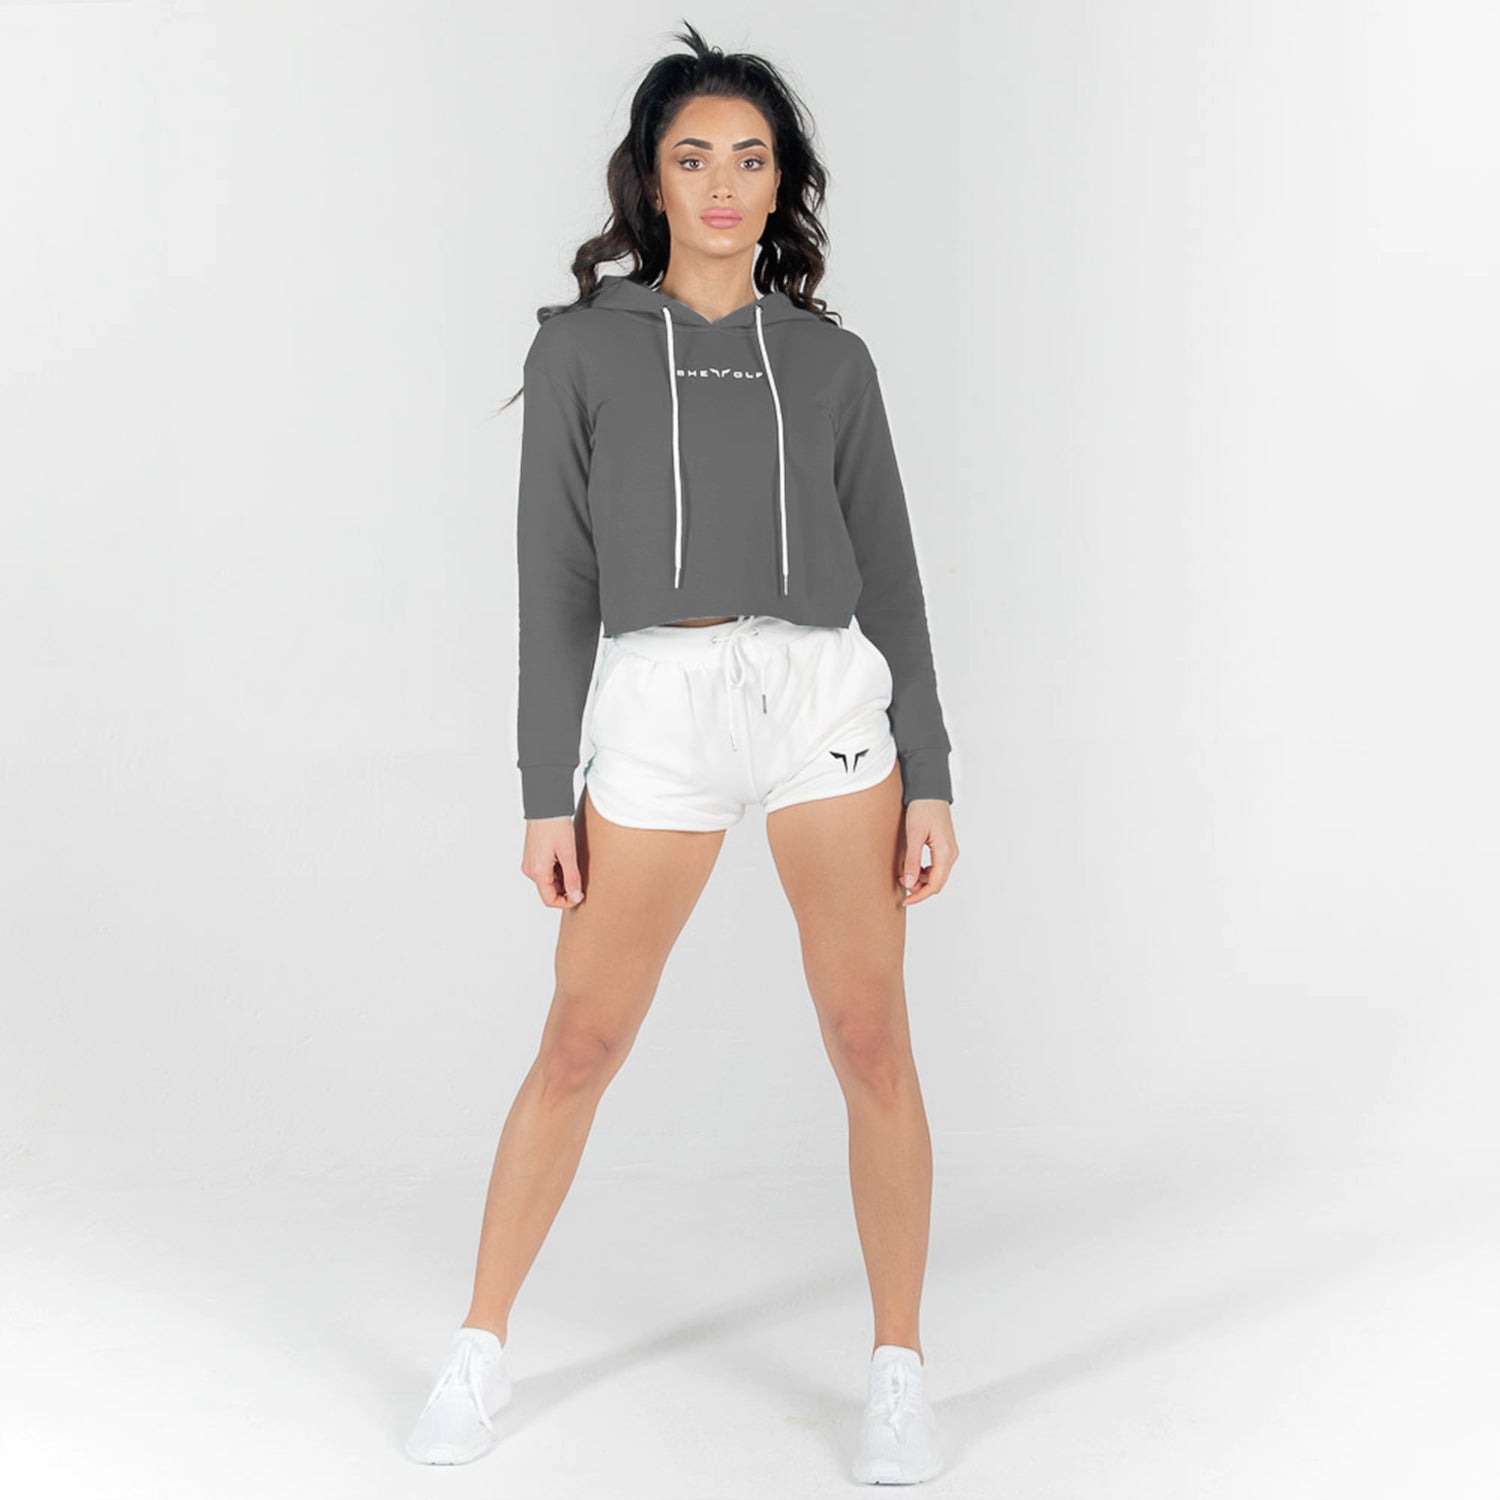 squatwolf-workout-clothes-she-wolf-crop-hoodie-charcoal-gym-hoodies-women